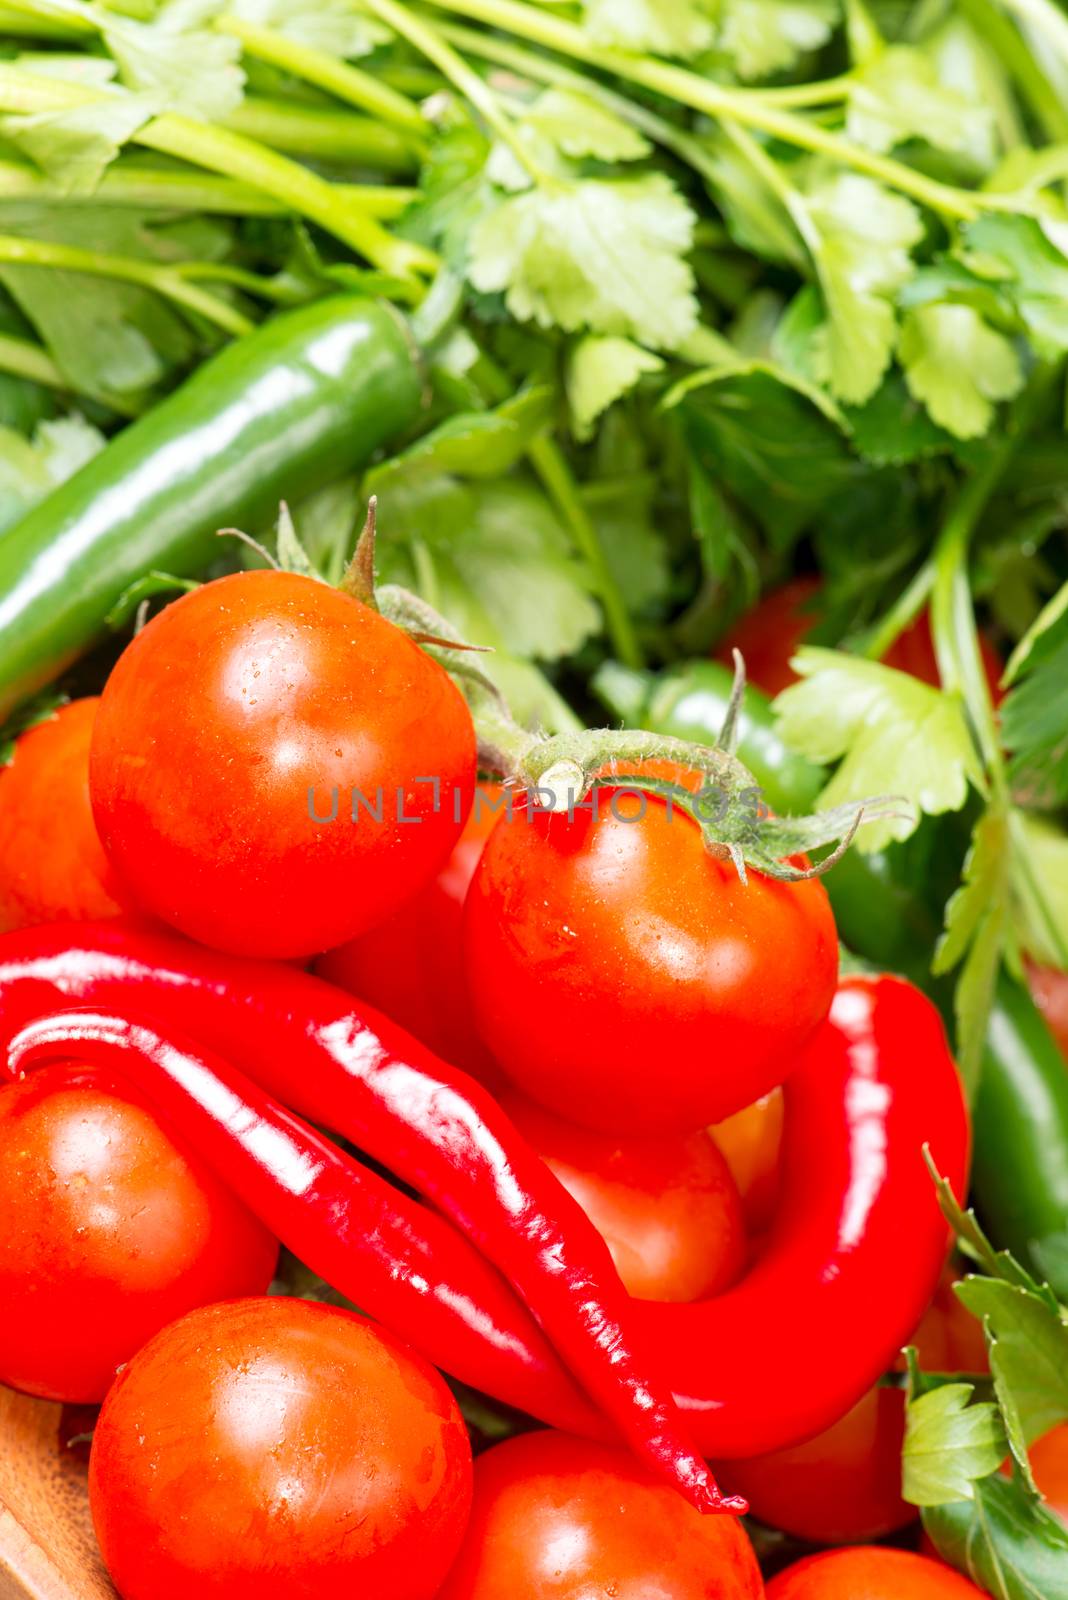 Tomato and red hot chili peppers close up by Nanisimova